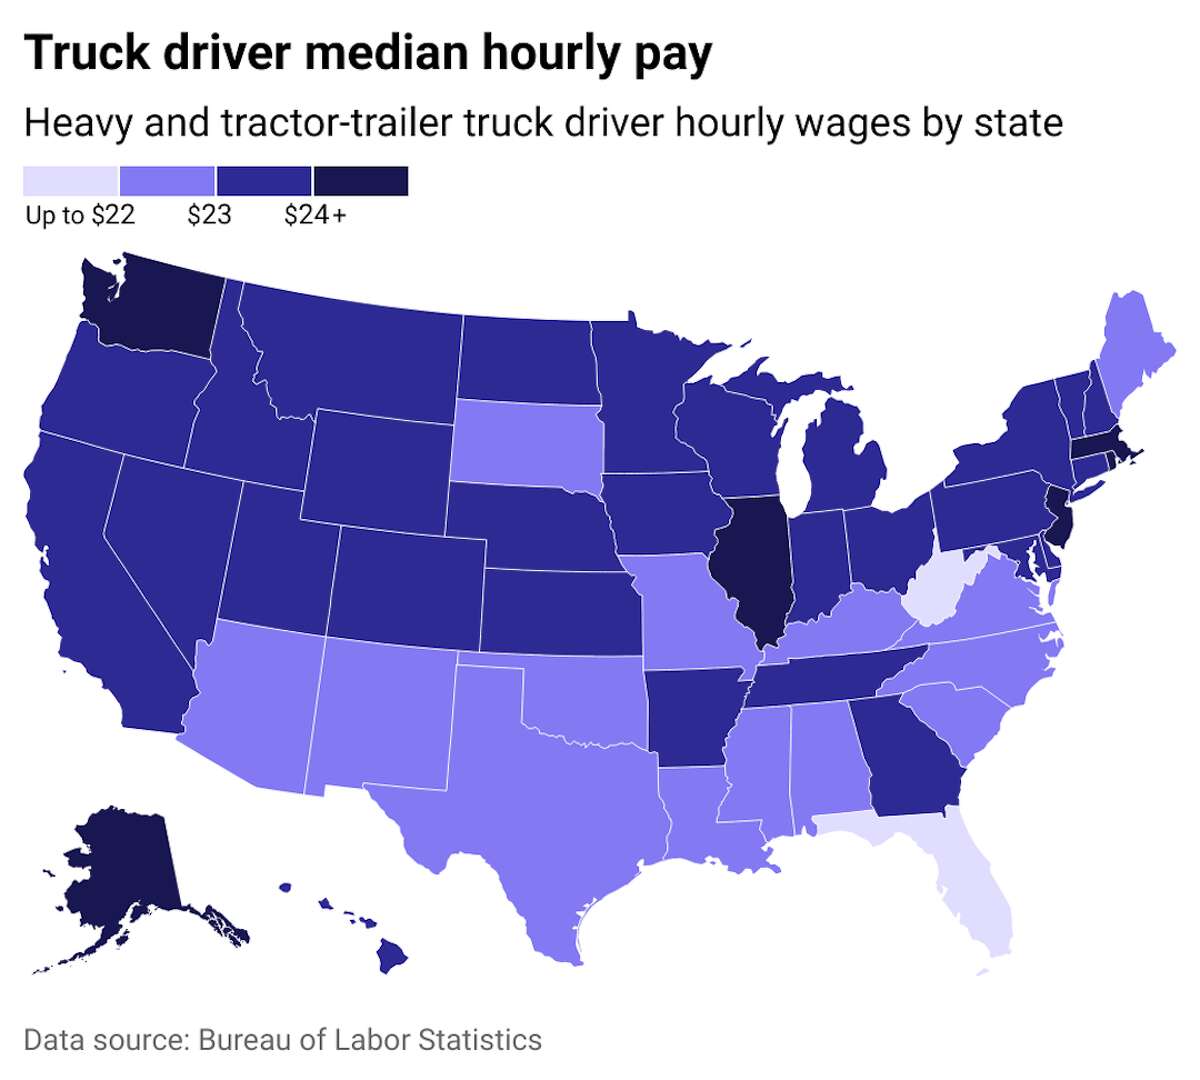 Truck drivers in most states make $22 to $24 per hour Truck drivers in the United States are well compensated compared to other jobs that require only a high school education. The median pay is $23.23 an hour, compared to the $18.42 average for workers with only a high school diploma. Truck drivers have been in especially high demand since the start of the coronavirus pandemic, according to the American Trucking Associations. As a result, trucking fleets are offering extraordinarily higher pay to attract and keep drivers. Weekly earnings have jumped five times their historical average and are up by more than 25% for long-haul, truckload drivers since the start of 2019. Drivers are also being offered thousands of dollars in sign-on bonuses and full benefits such as paid leave, health insurance, and 401(k) retirement funds.